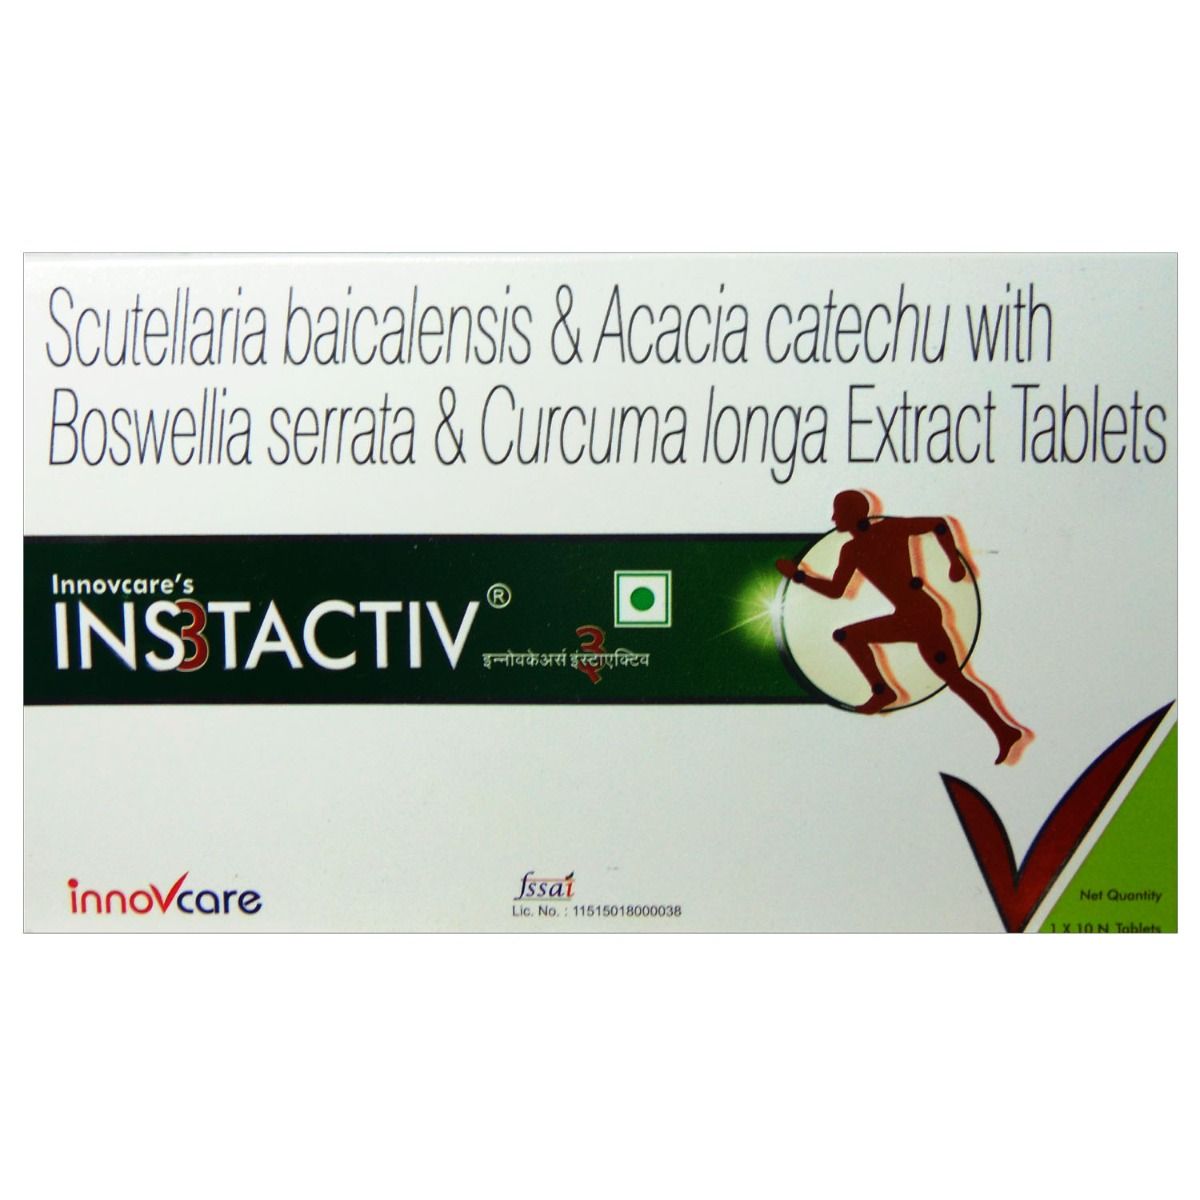 INS3Tactiv Tablet 10's, Pack of 10 S